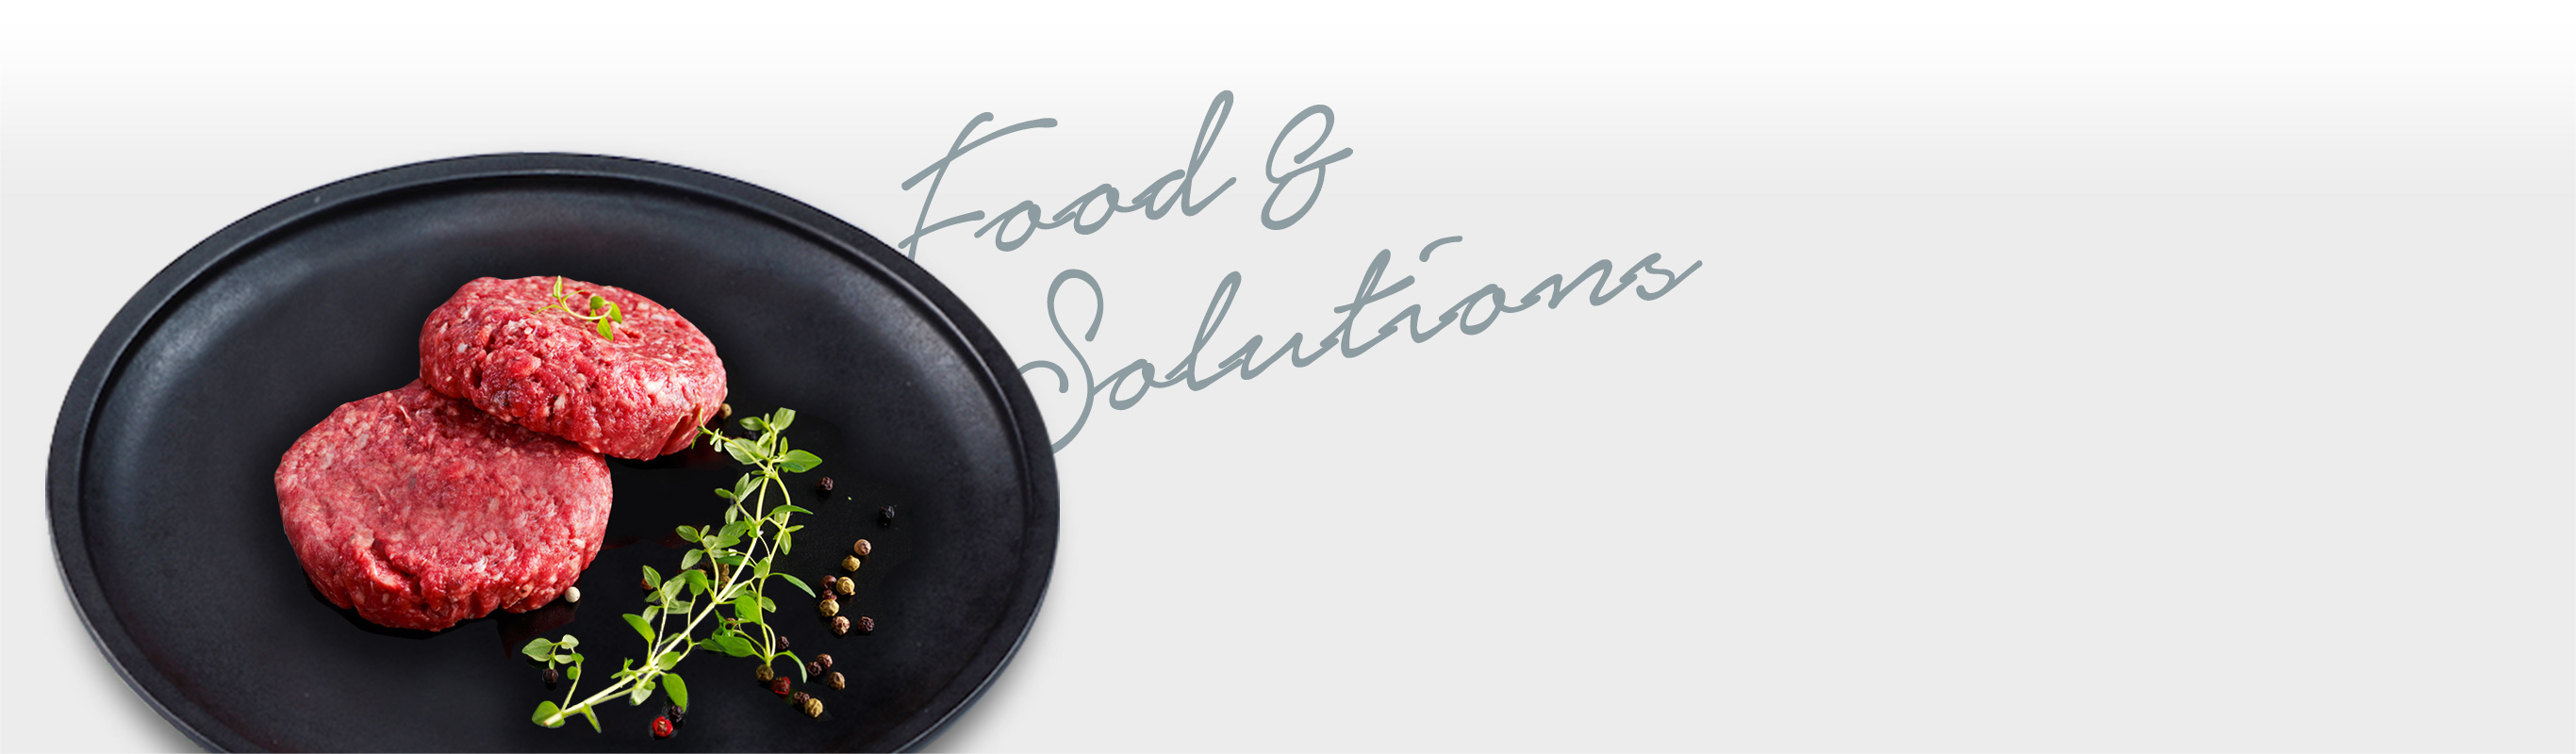 Food & Solutions